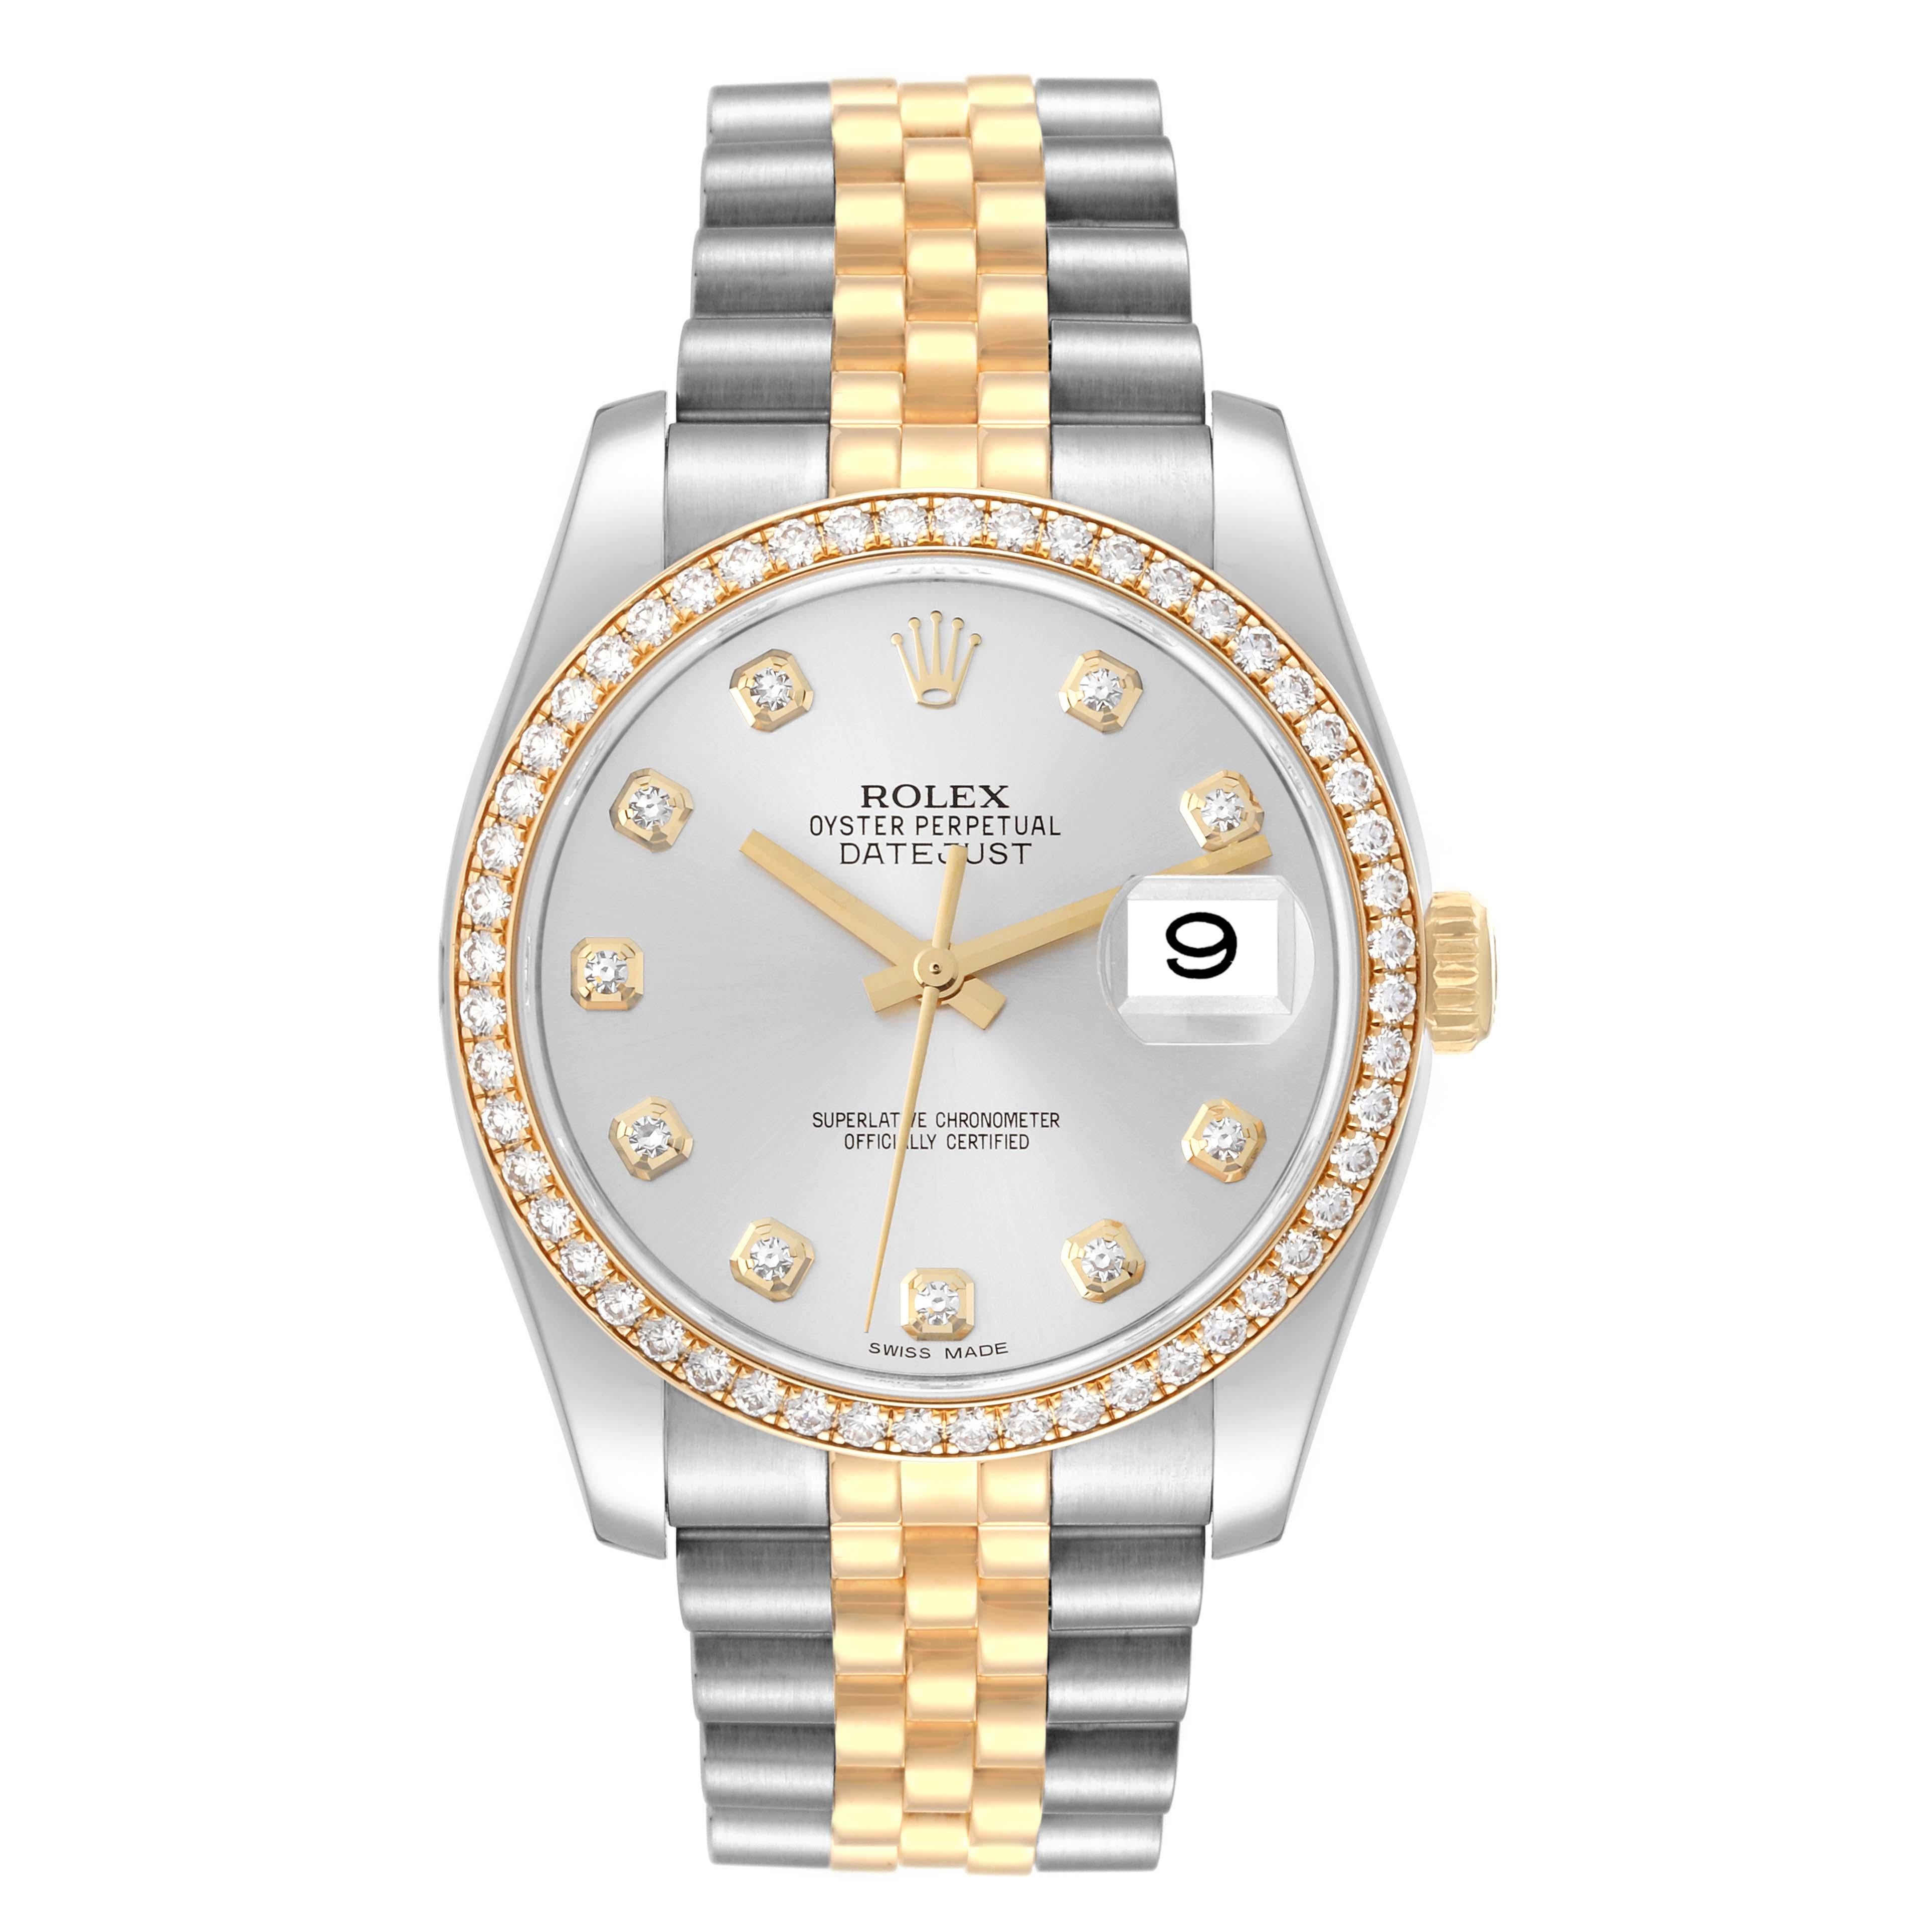 Rolex Datejust 36 Steel Yellow Gold Silver Dial Diamond Mens Watch 116243. Officially certified chronometer automatic self-winding movement. Stainless steel case 36.0 mm in diameter.  Rolex logo on the crown. 18k yellow gold bezel set with original